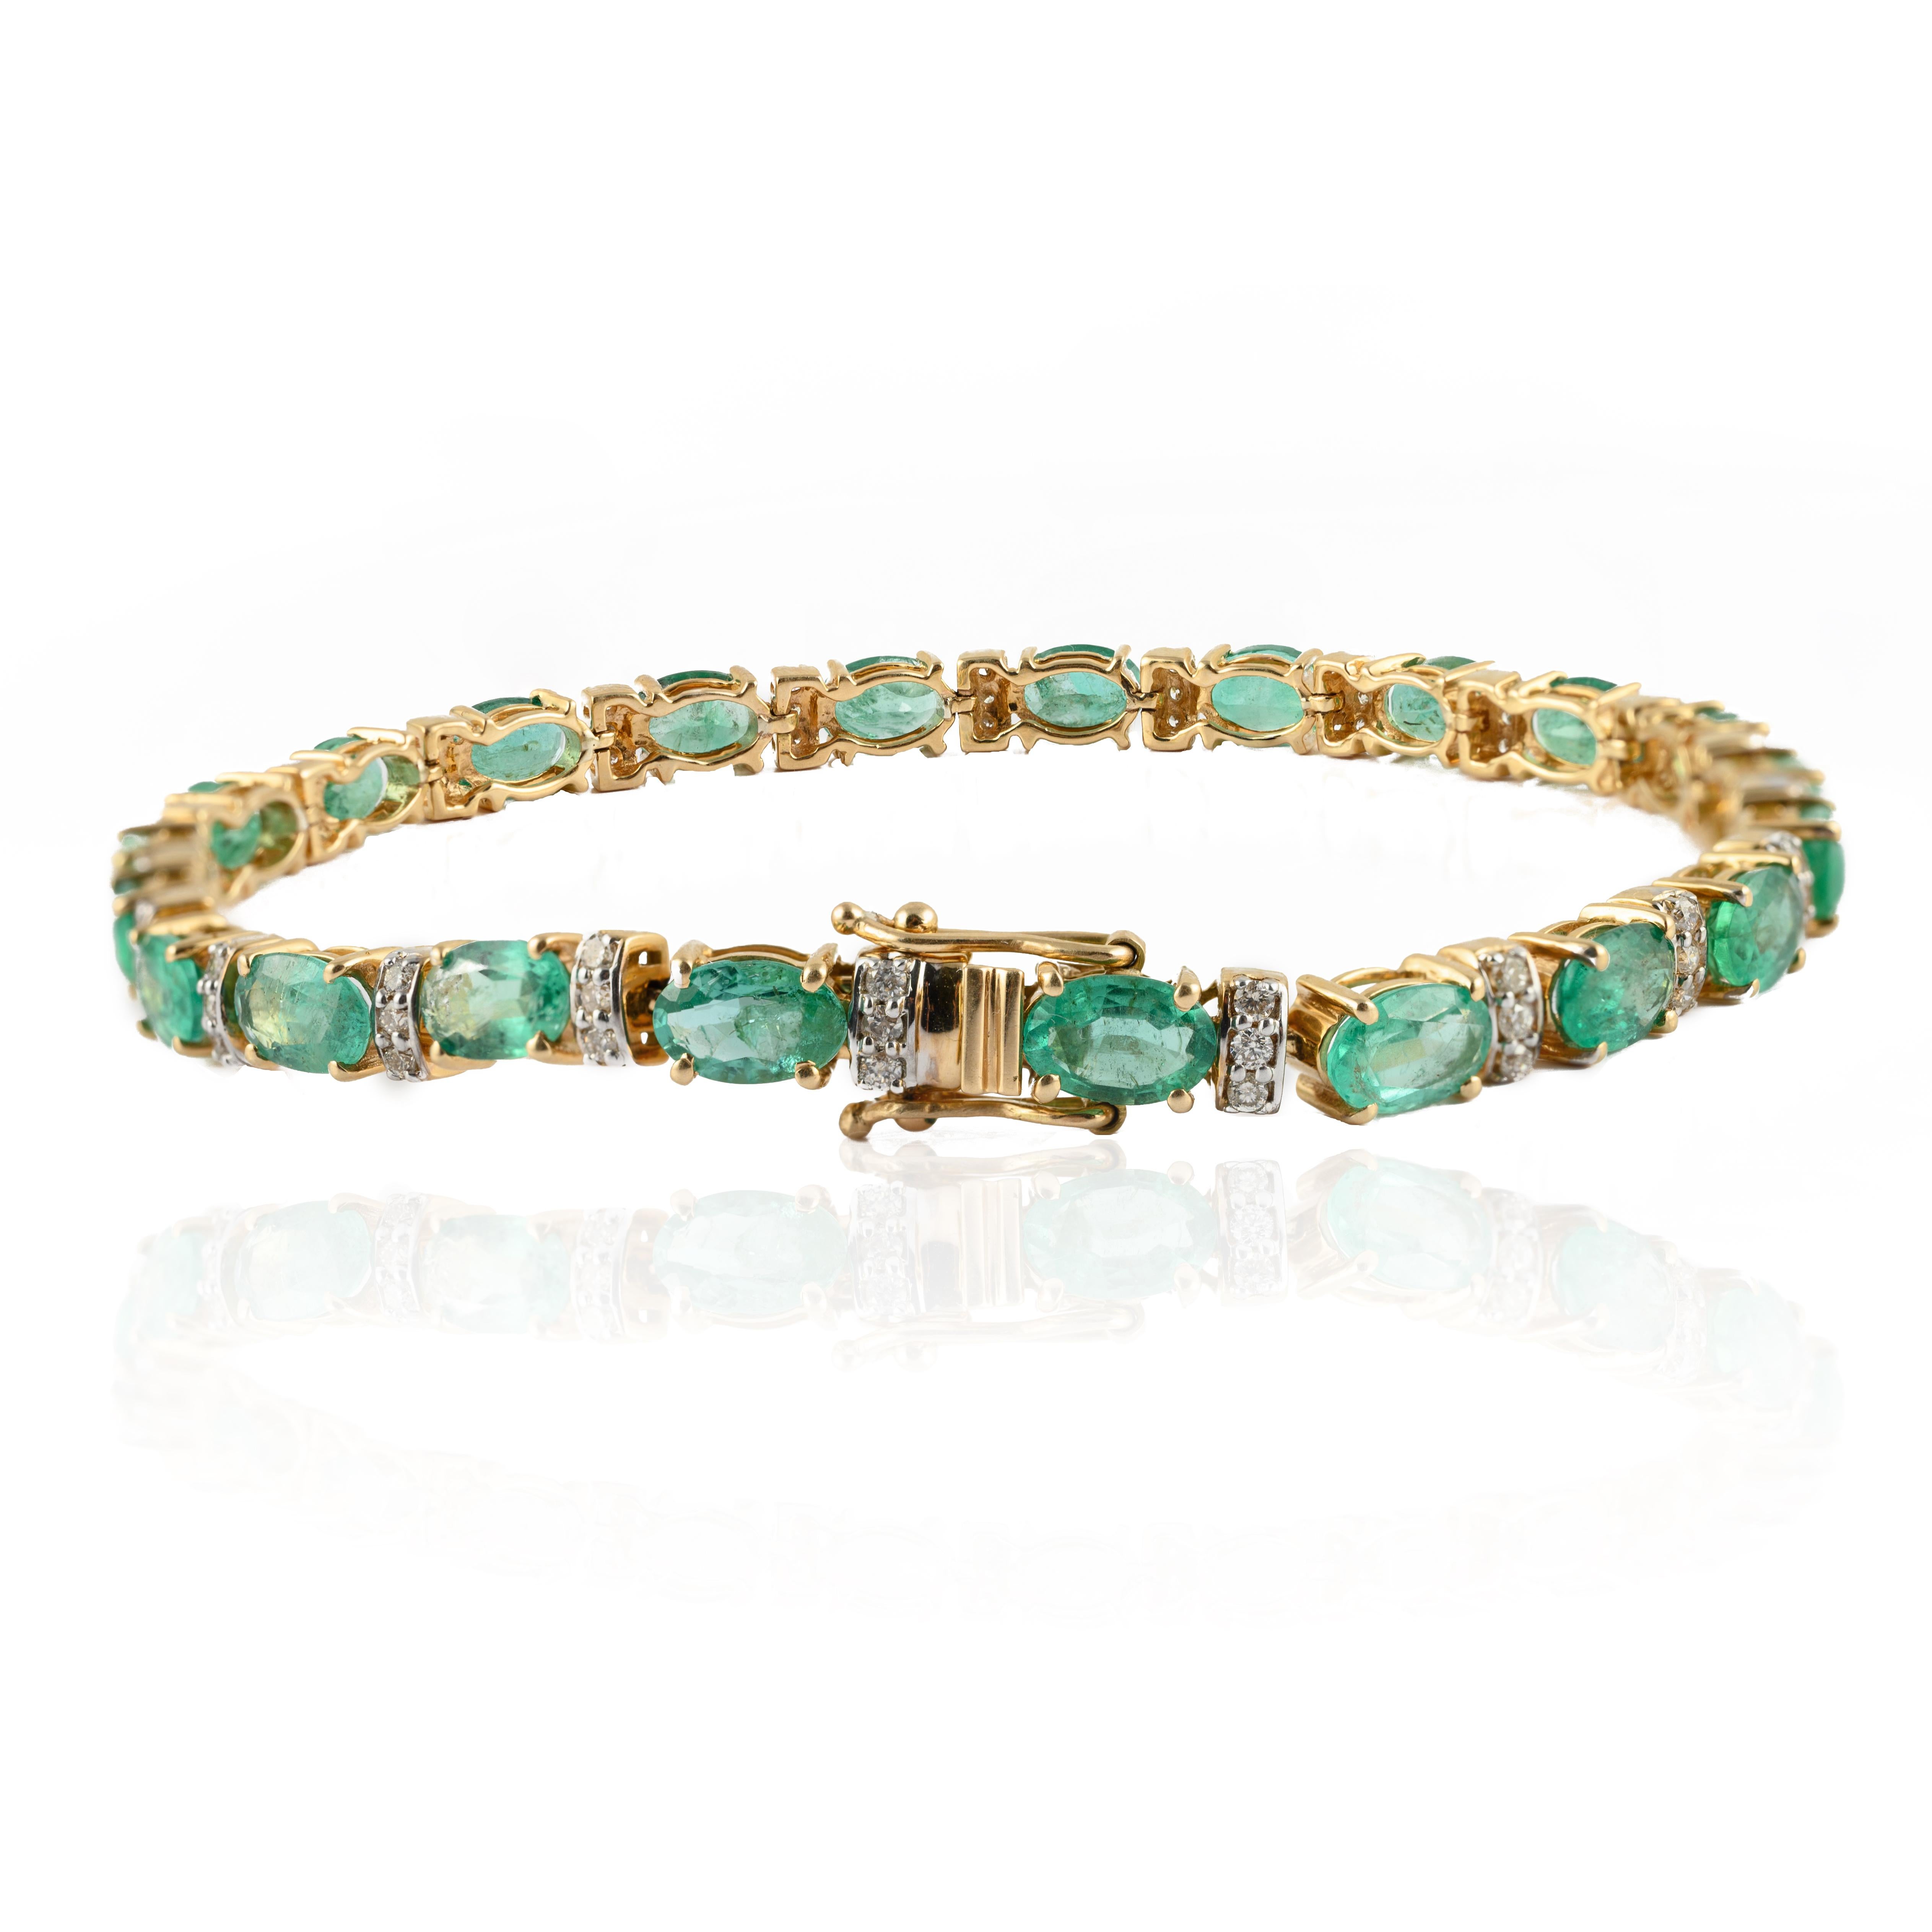 This Emerald Diamond Tennis Bracelet in 14K gold showcases 22 endlessly sparkling natural emerald, weighing 9.46 carat and 66 pieces of diamonds weighing 0.59 carat. It measures 7.5 inches long in length. 
Emerald enhances intellectual capacity of